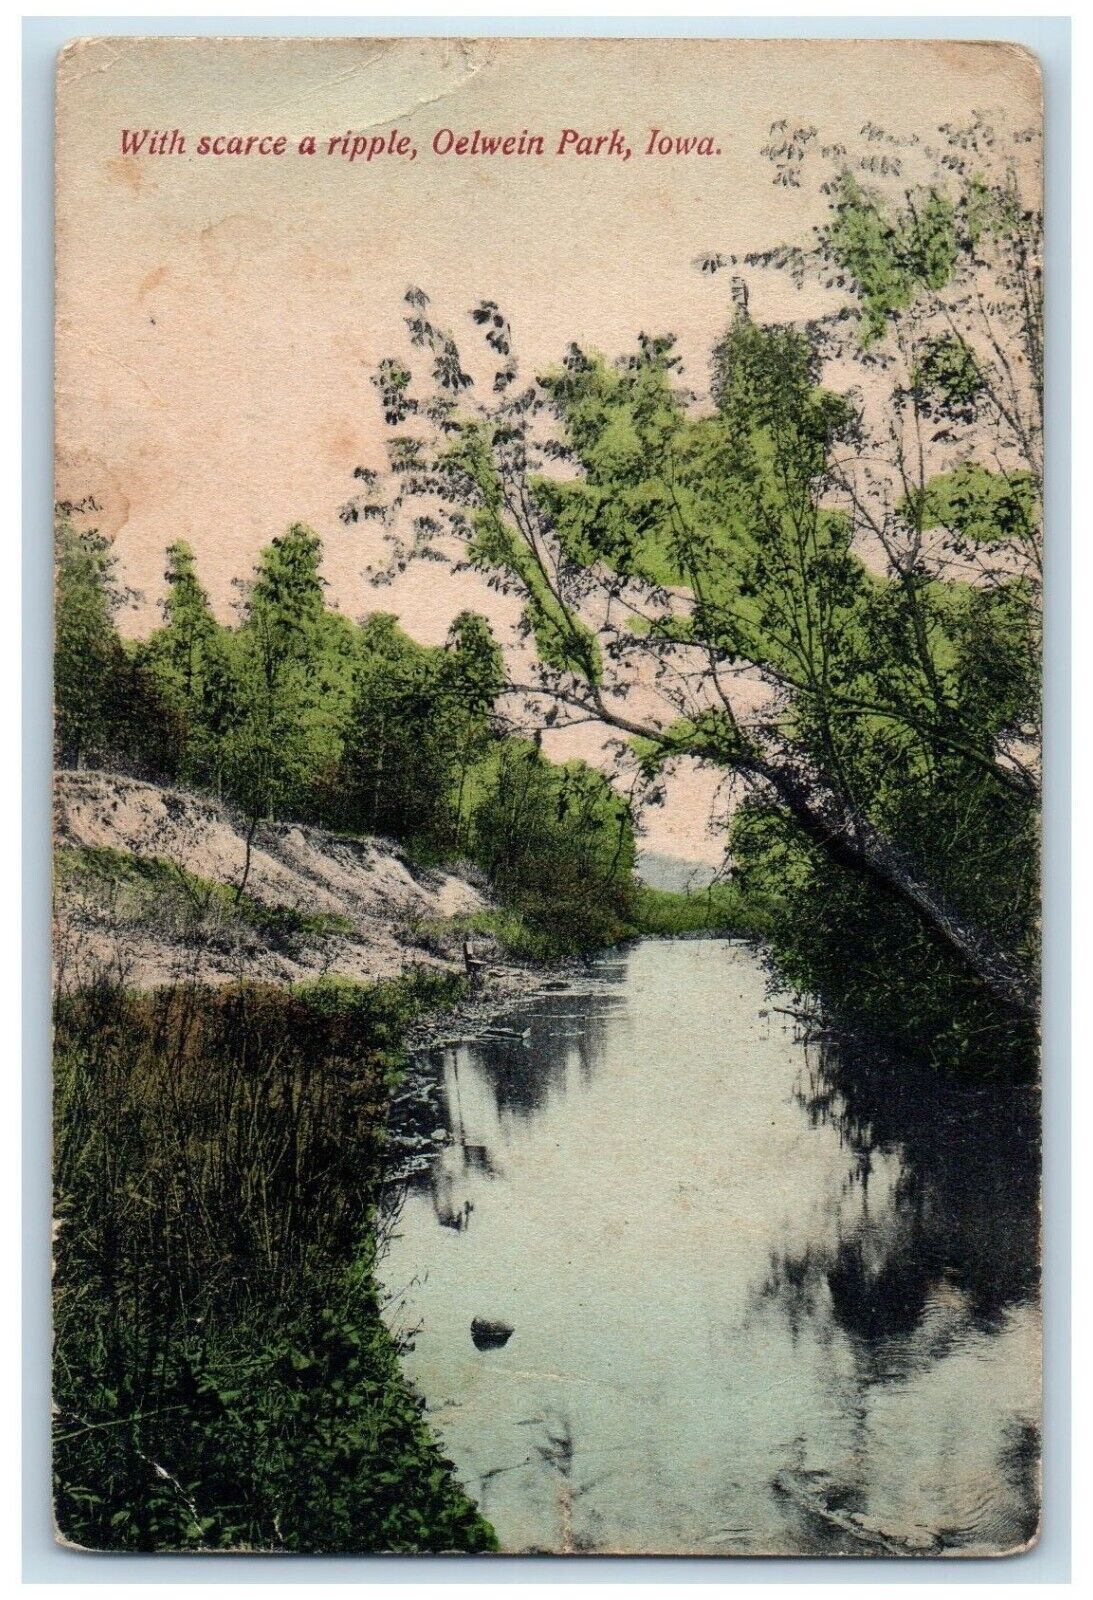 c1910 Scenic View With Scarce Ripple Oelwein Park Iowa Antique Vintage Postcard